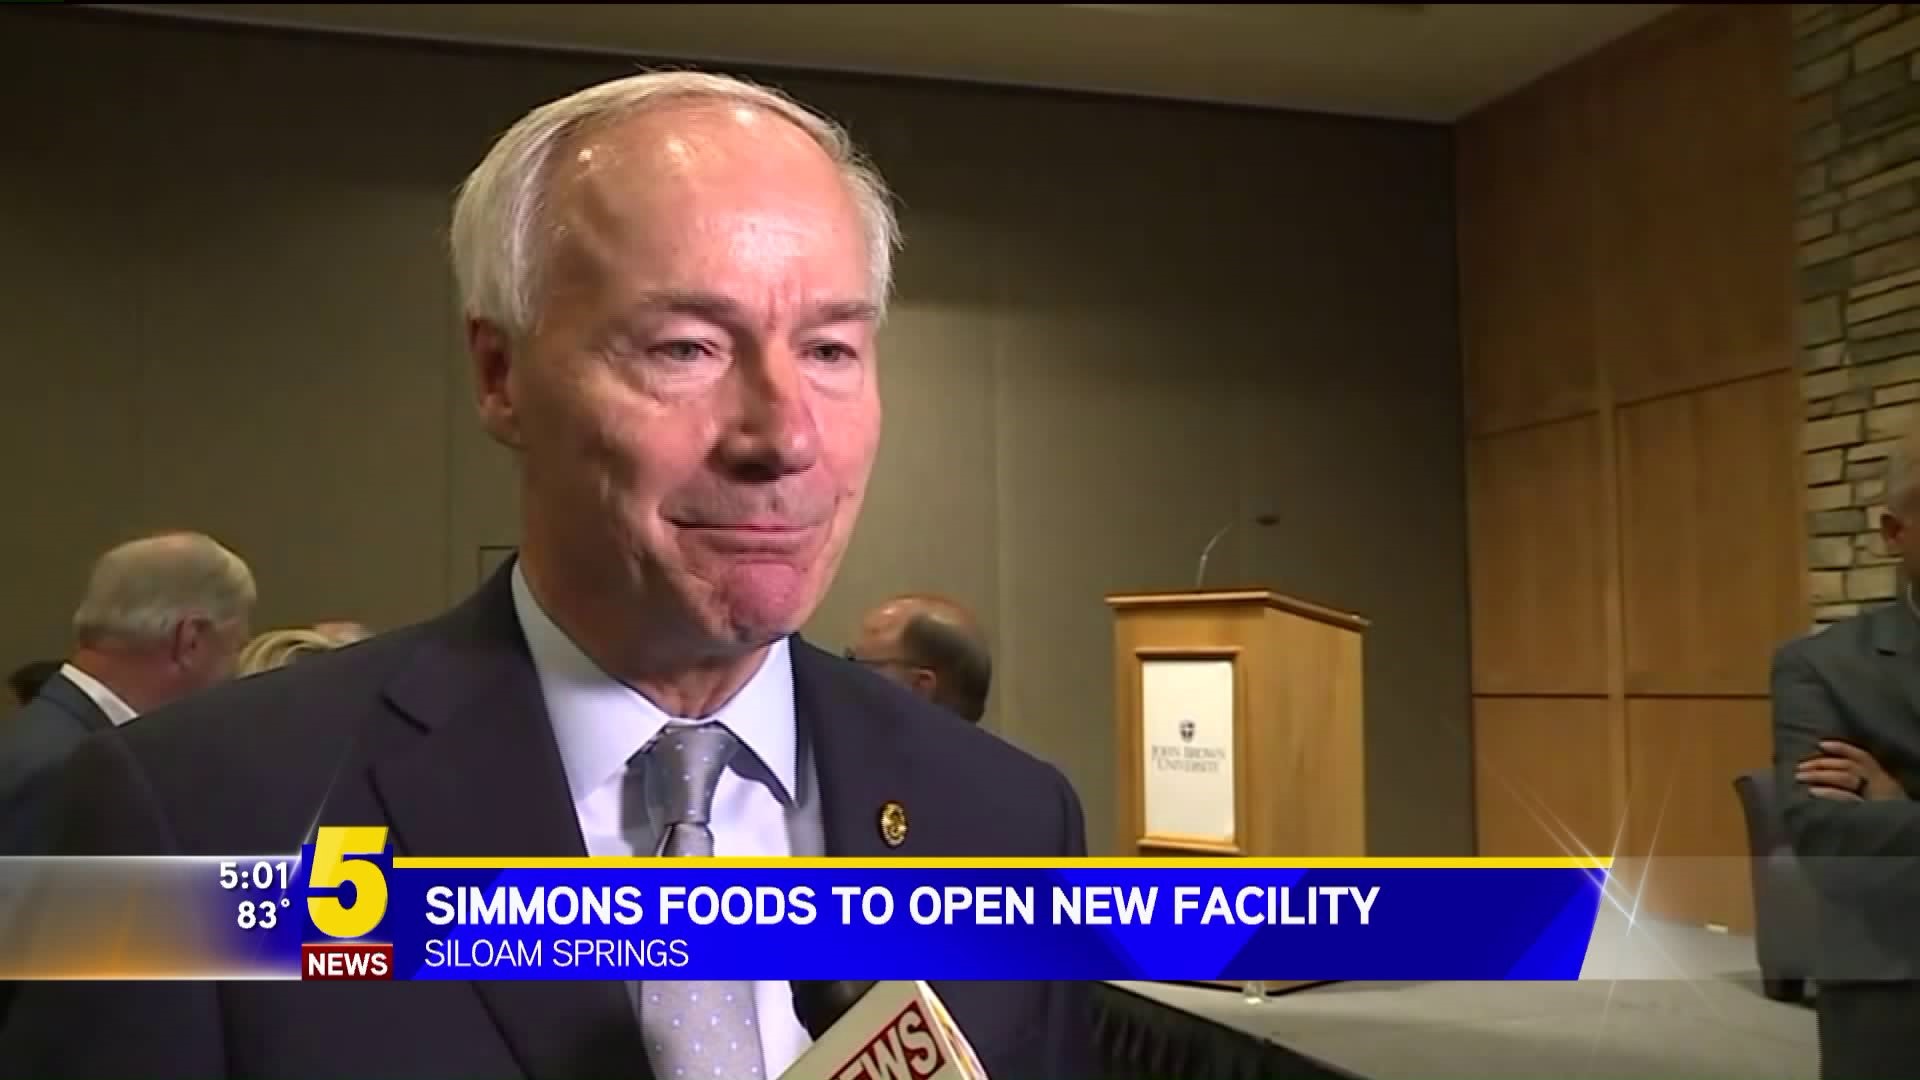 Simmons Foods To Open New Facility